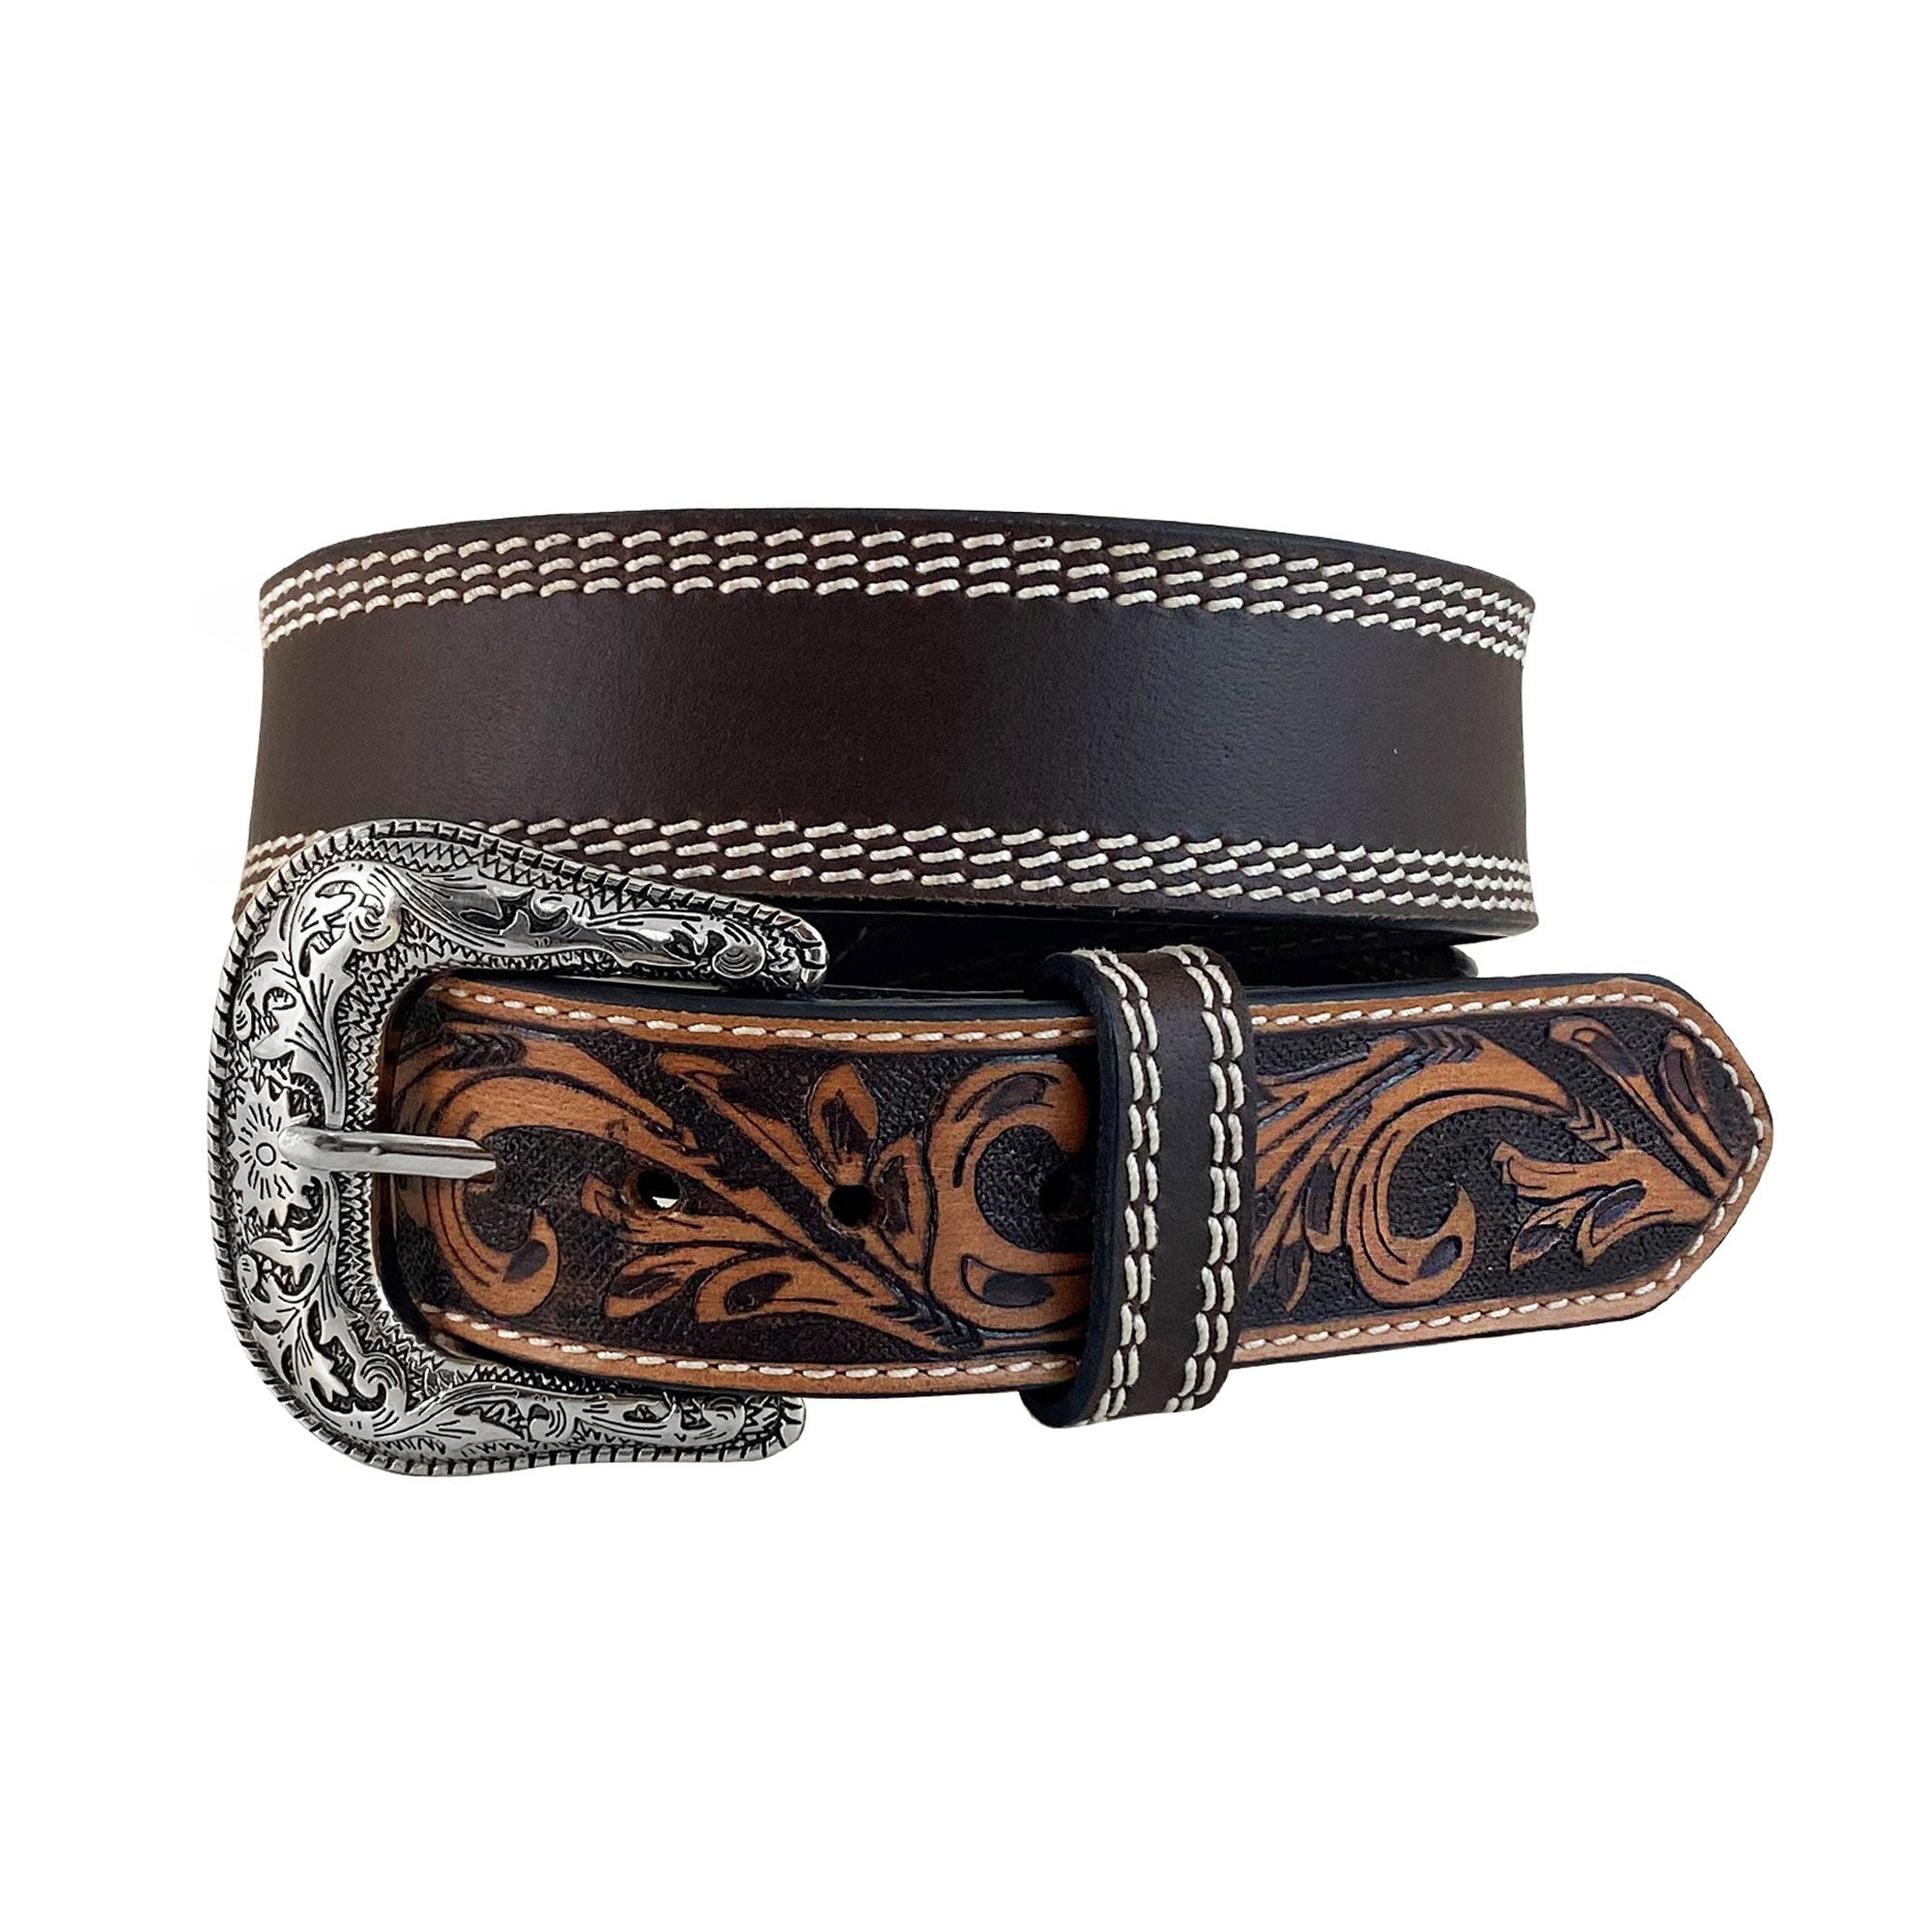 Roper Mns Belt 1.5in Genuine Leather with Buff Harness Floral End Tabs Brown